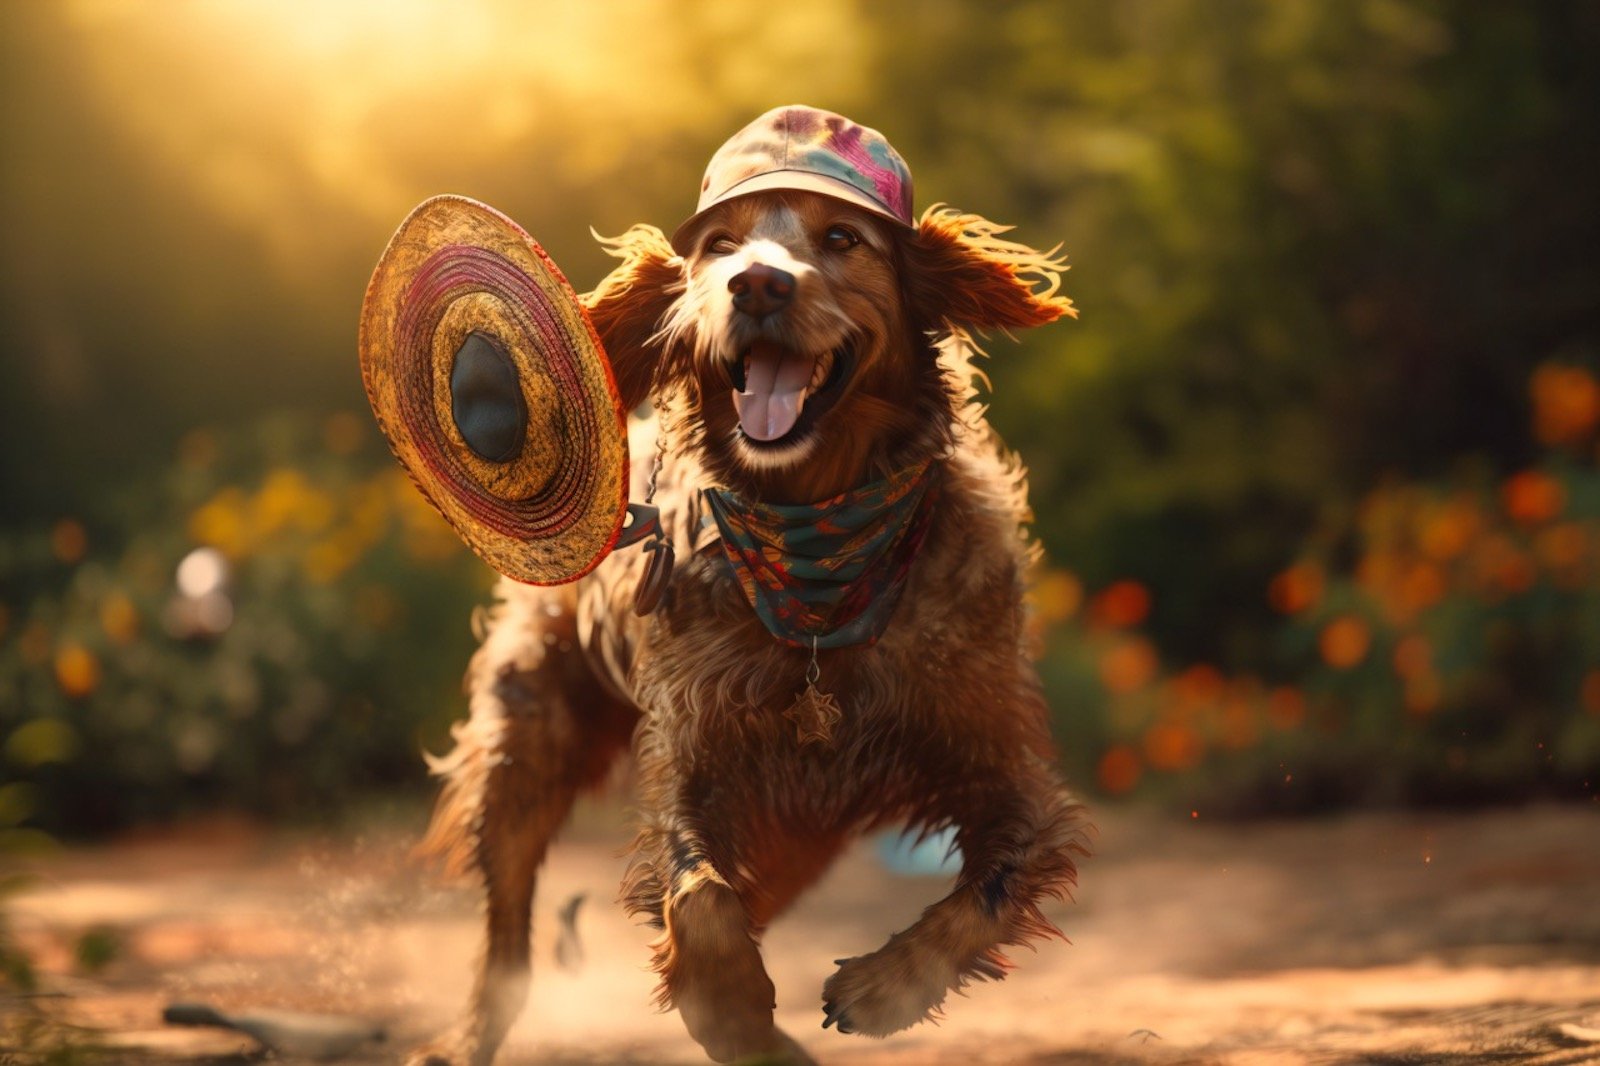 A happy dog wearing a beach hat and sunglasses, catching a frisbee mid-air and wagging its tail with joy